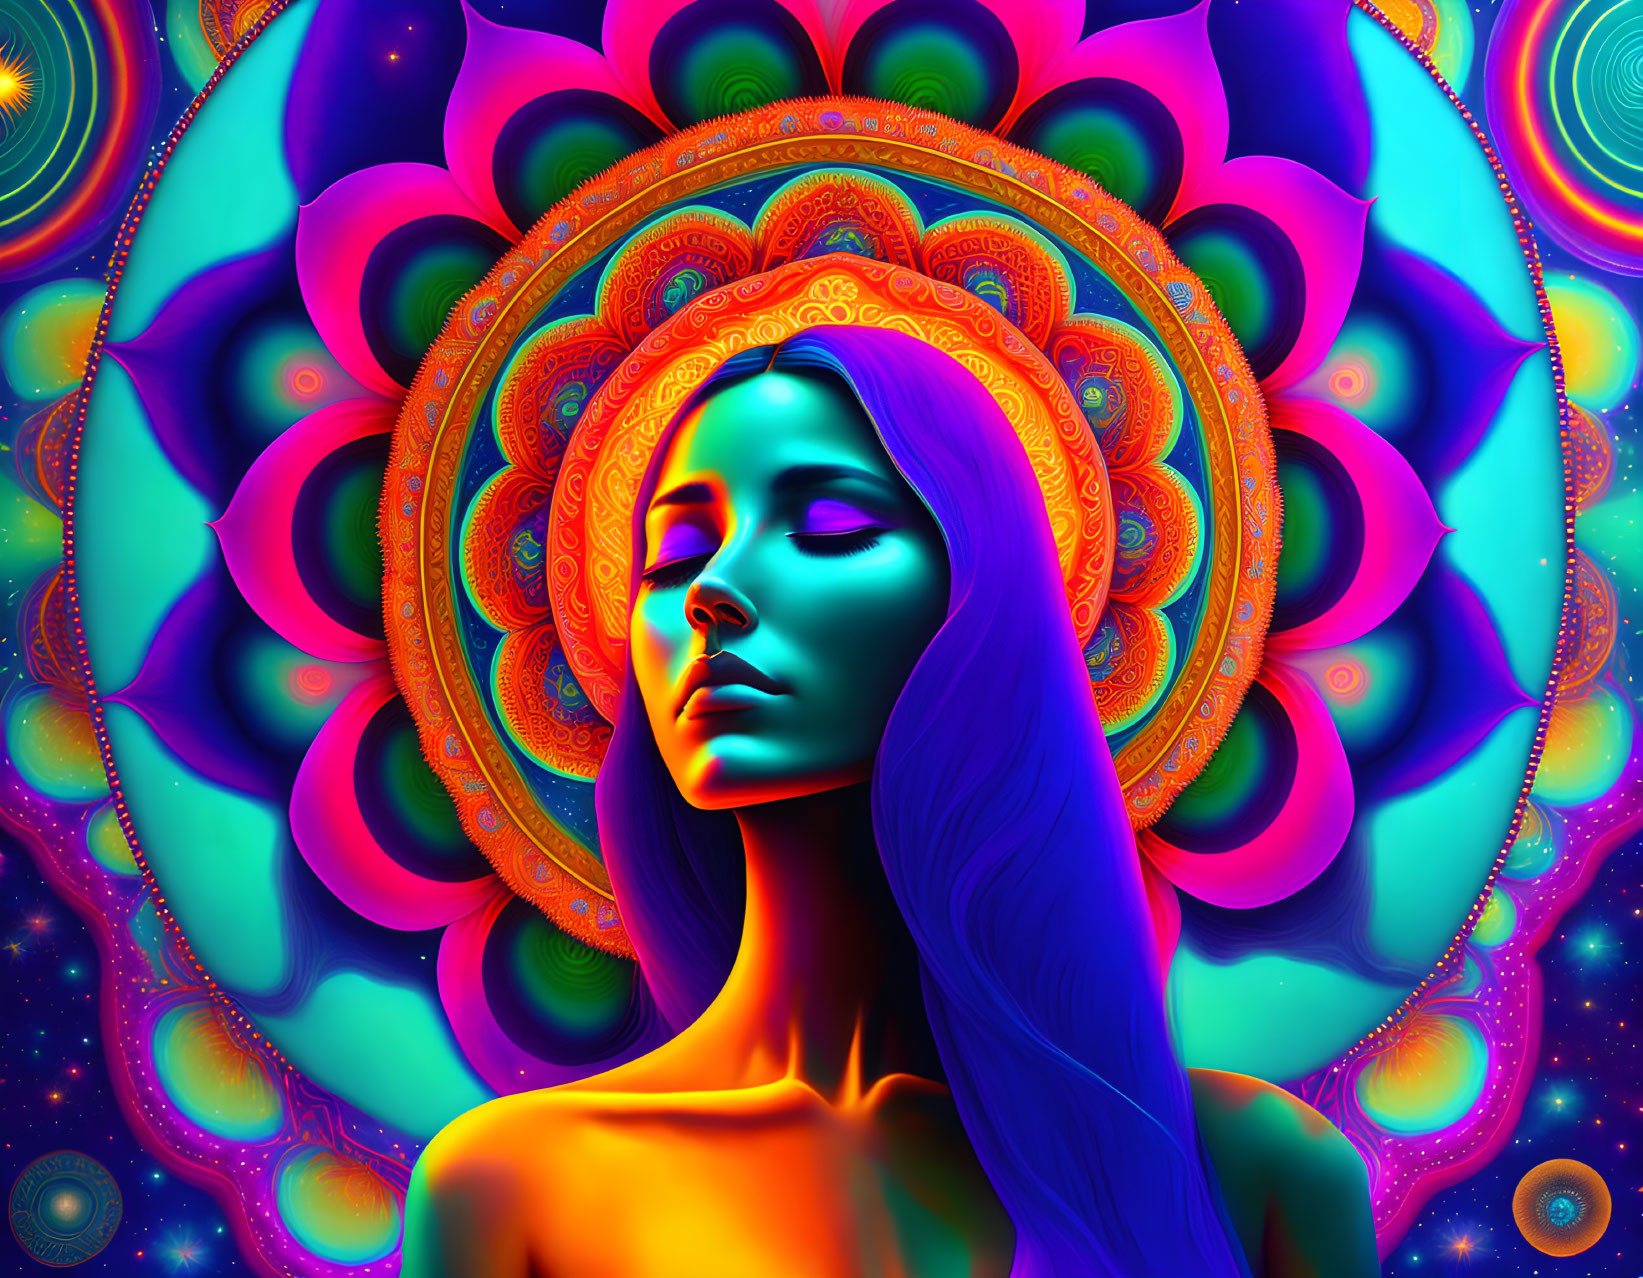 Colorful Psychedelic Art: Blue Woman in Flowing Hair on Kaleidoscopic Mandala